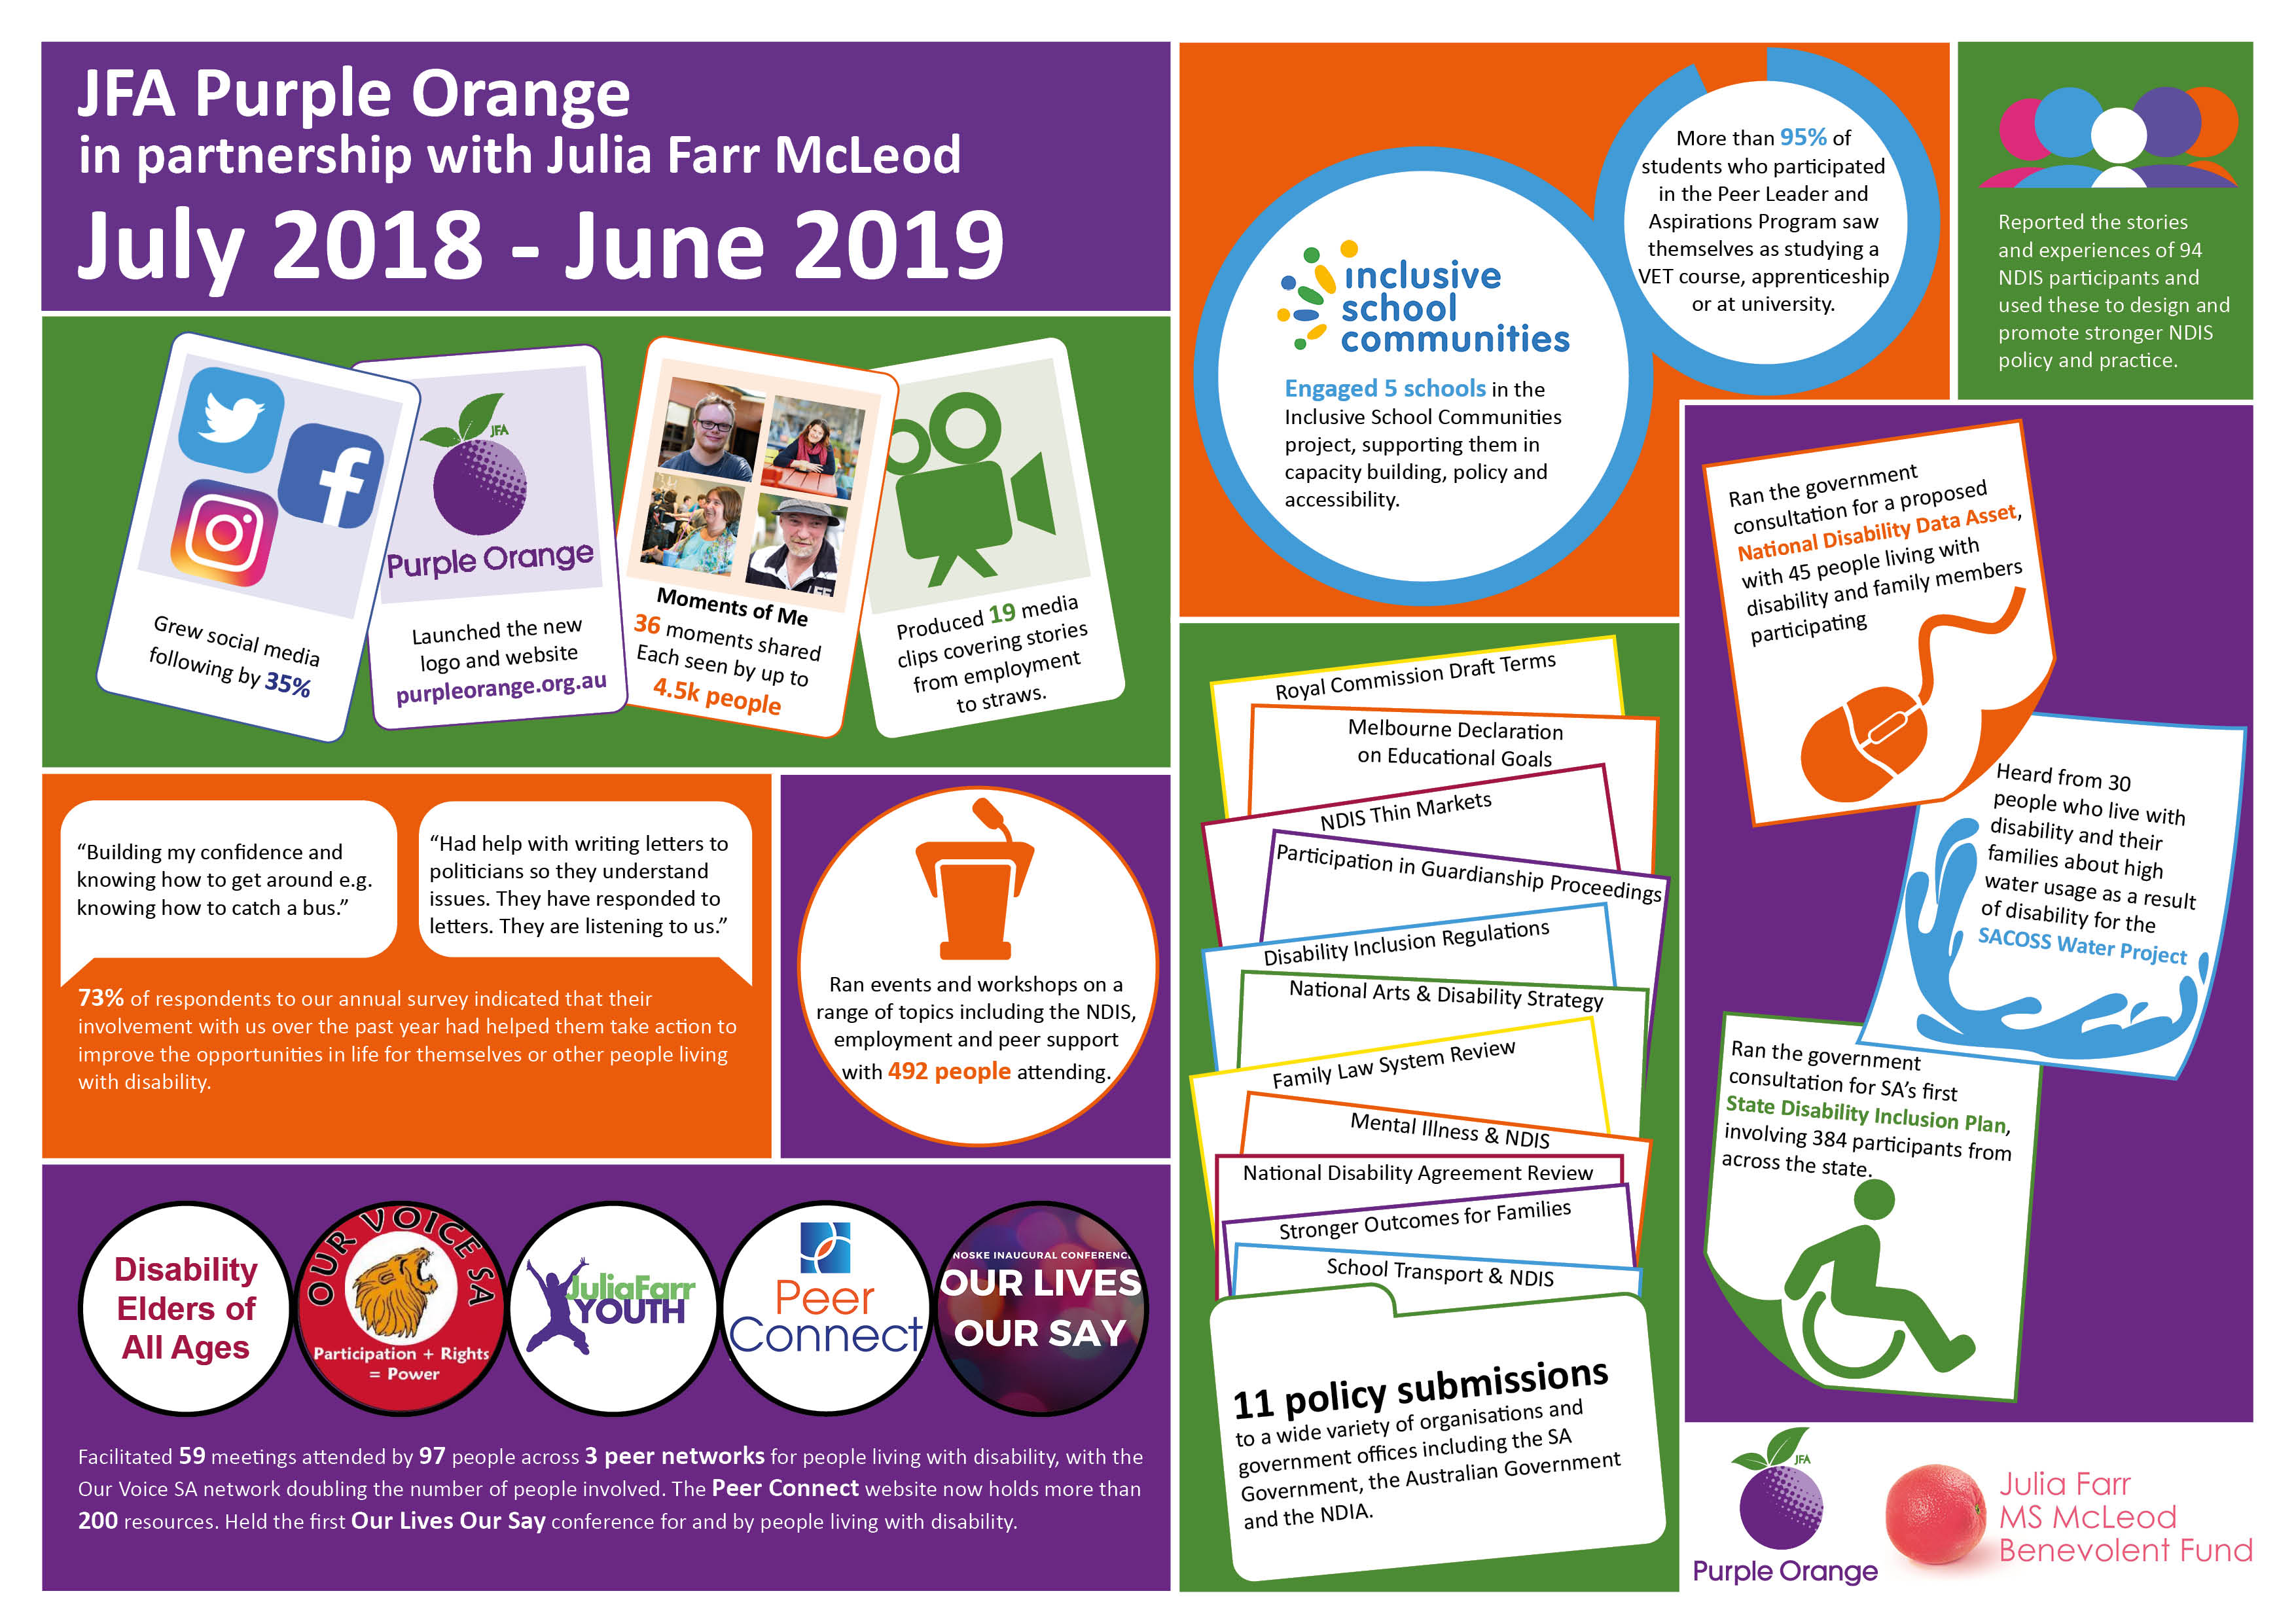 This infographic shows some of the work JFA Purple Orange achieved between July 2018 and June 2019. Detail is outlined below image.